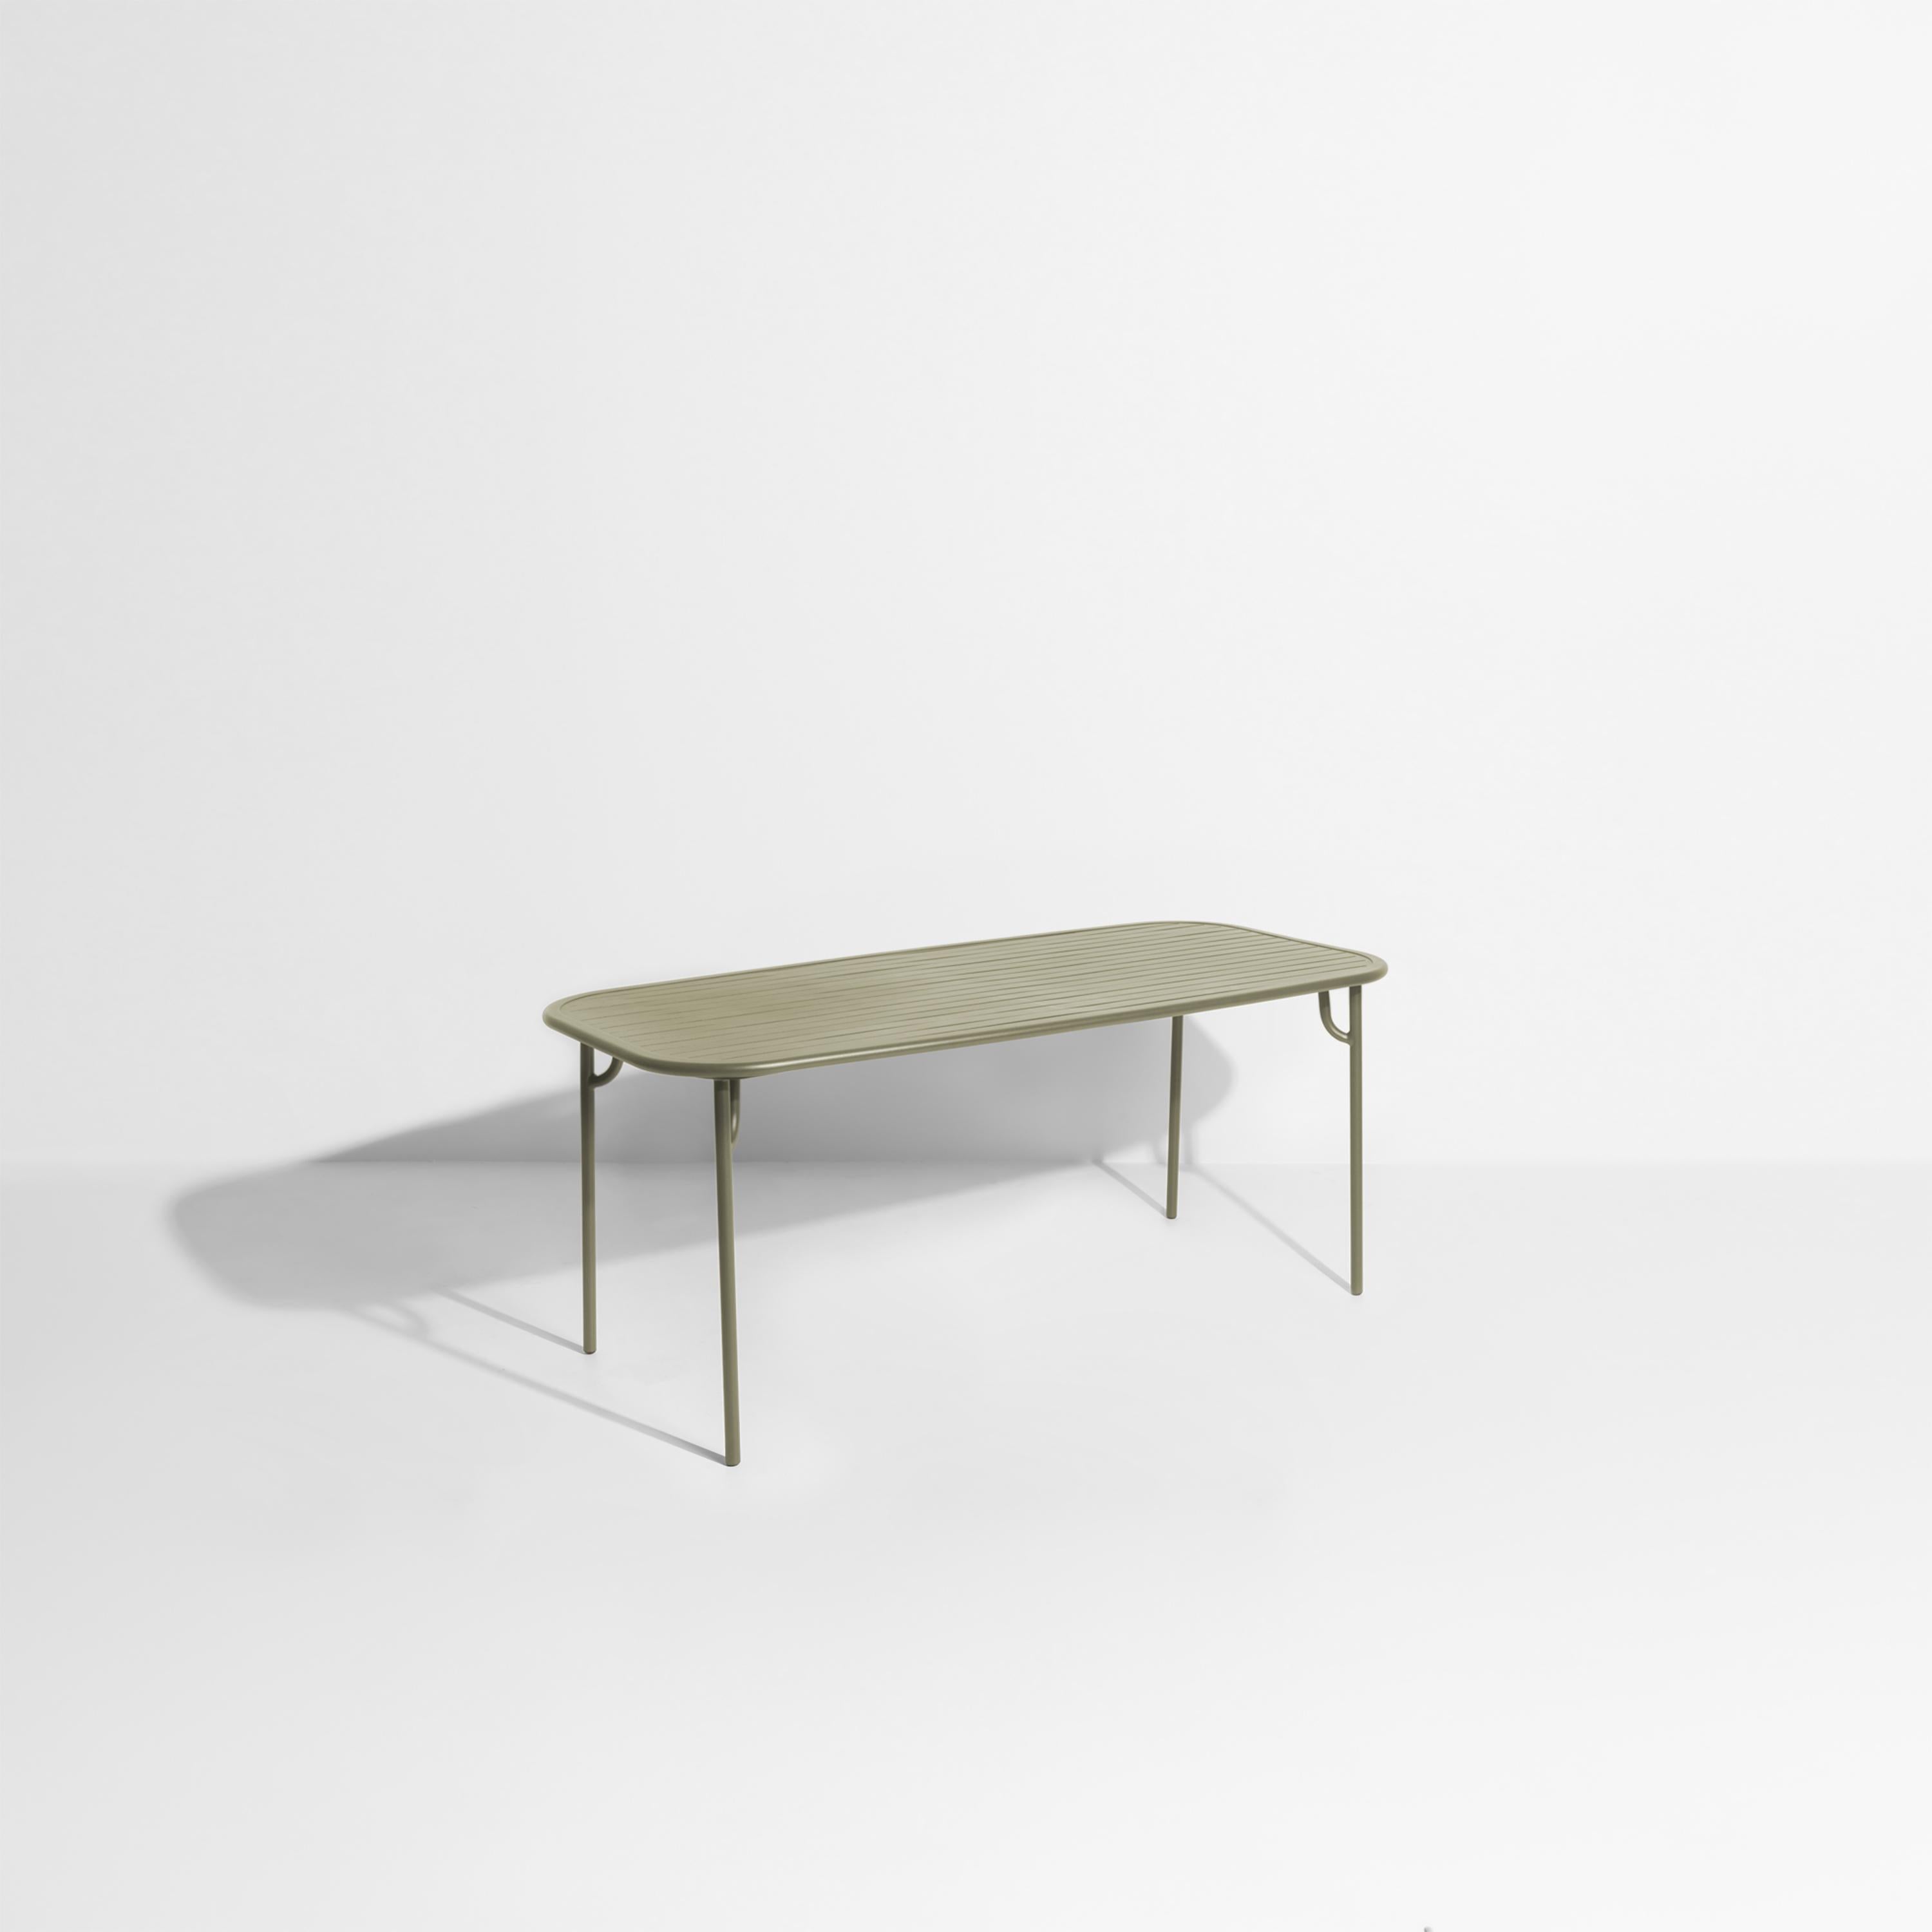 Petite Friture Week-End Medium Rectangular Dining Table in Jade Green Aluminium with Slats by Studio BrichetZiegler, 2017

The week-end collection is a full range of outdoor furniture, in aluminium grained epoxy paint, matt finish, that includes